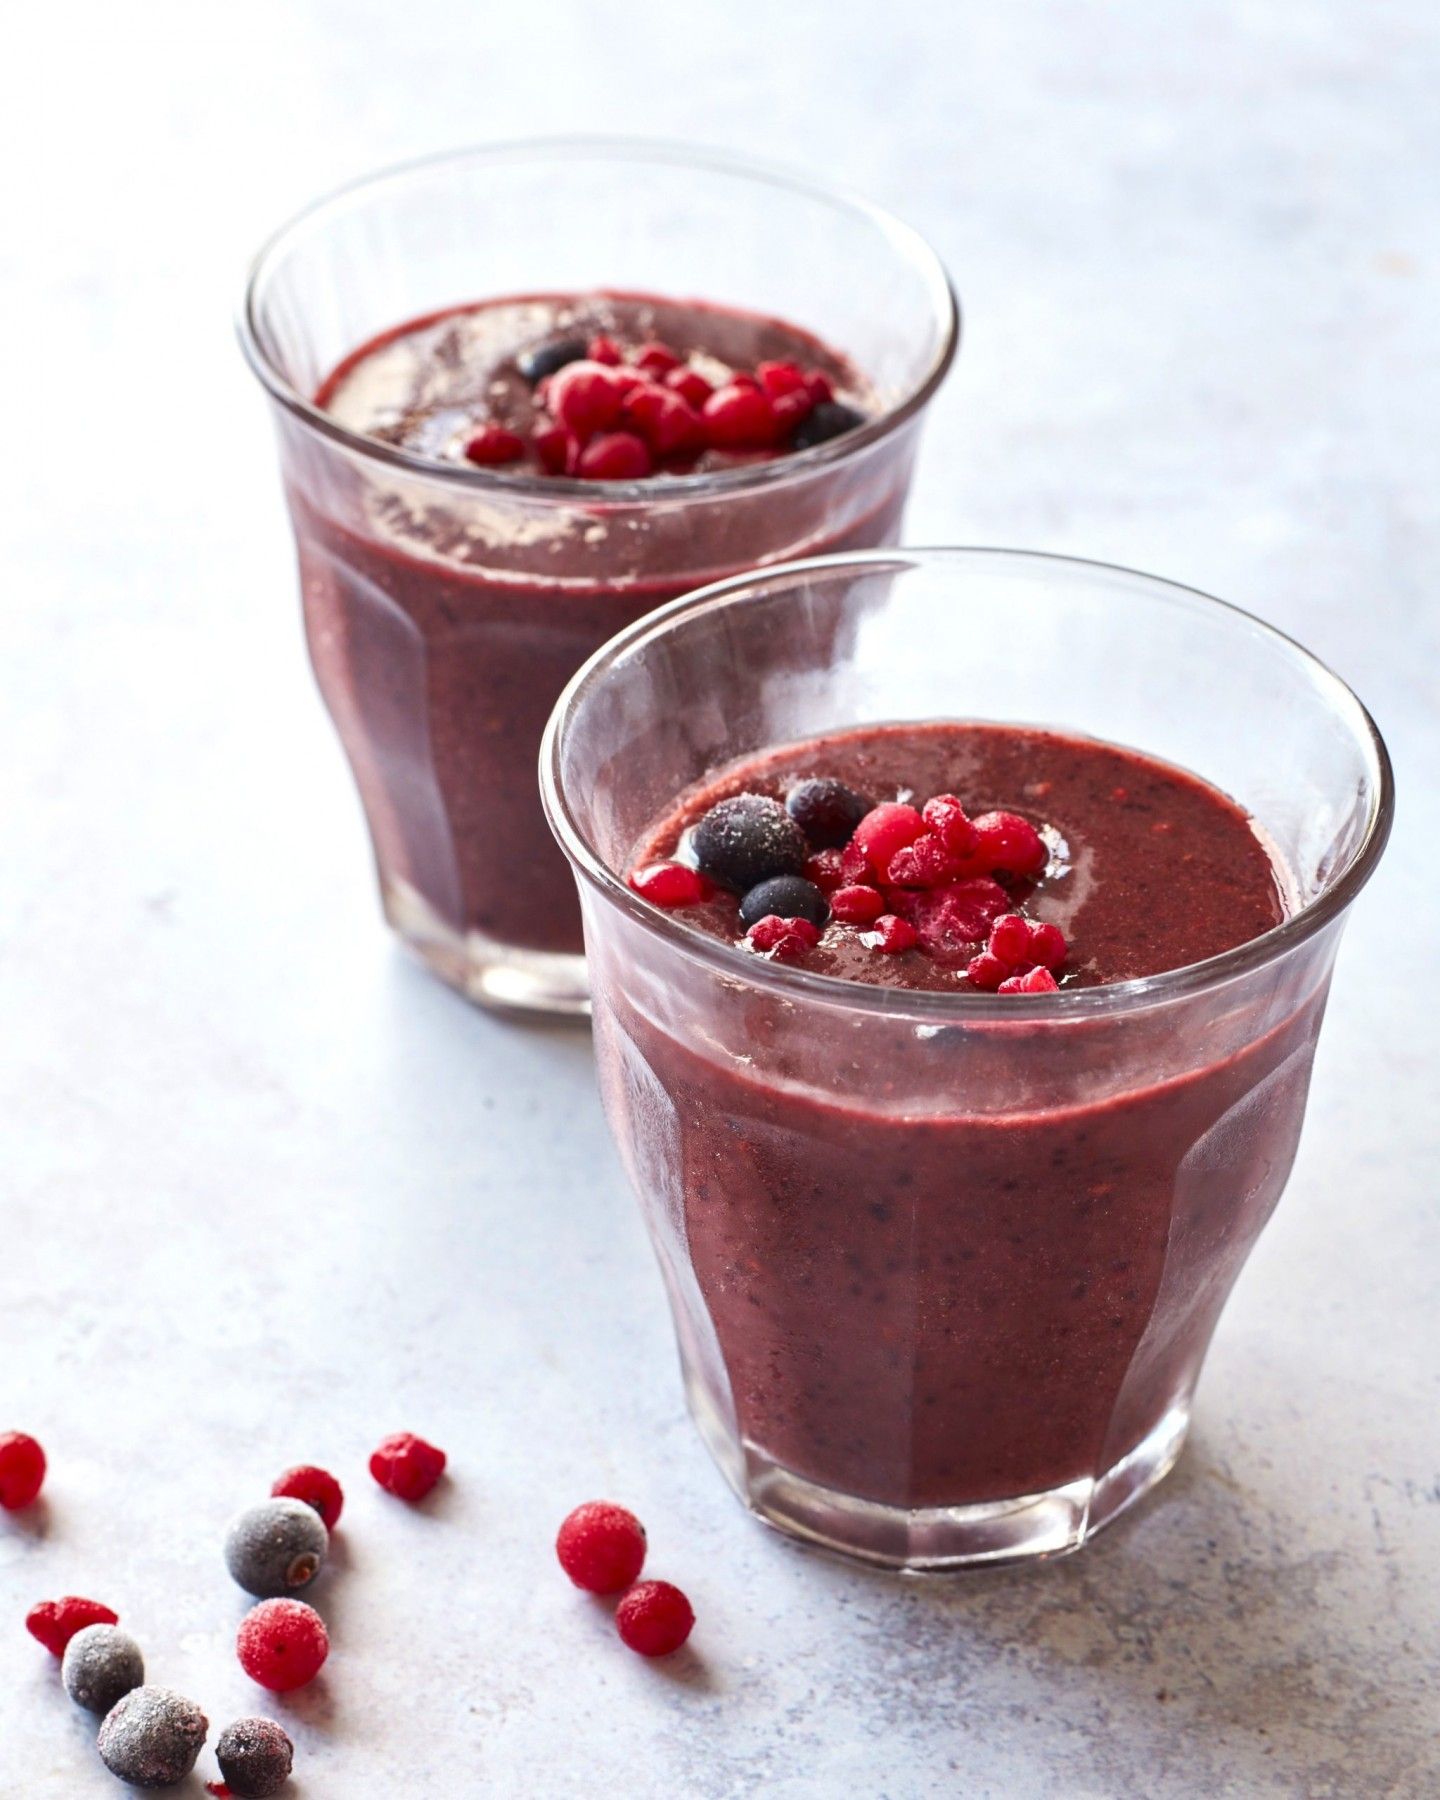 Amelia Freer's 10 recipes for nourishing your body this January - Smoothie - Humphrey Munson 